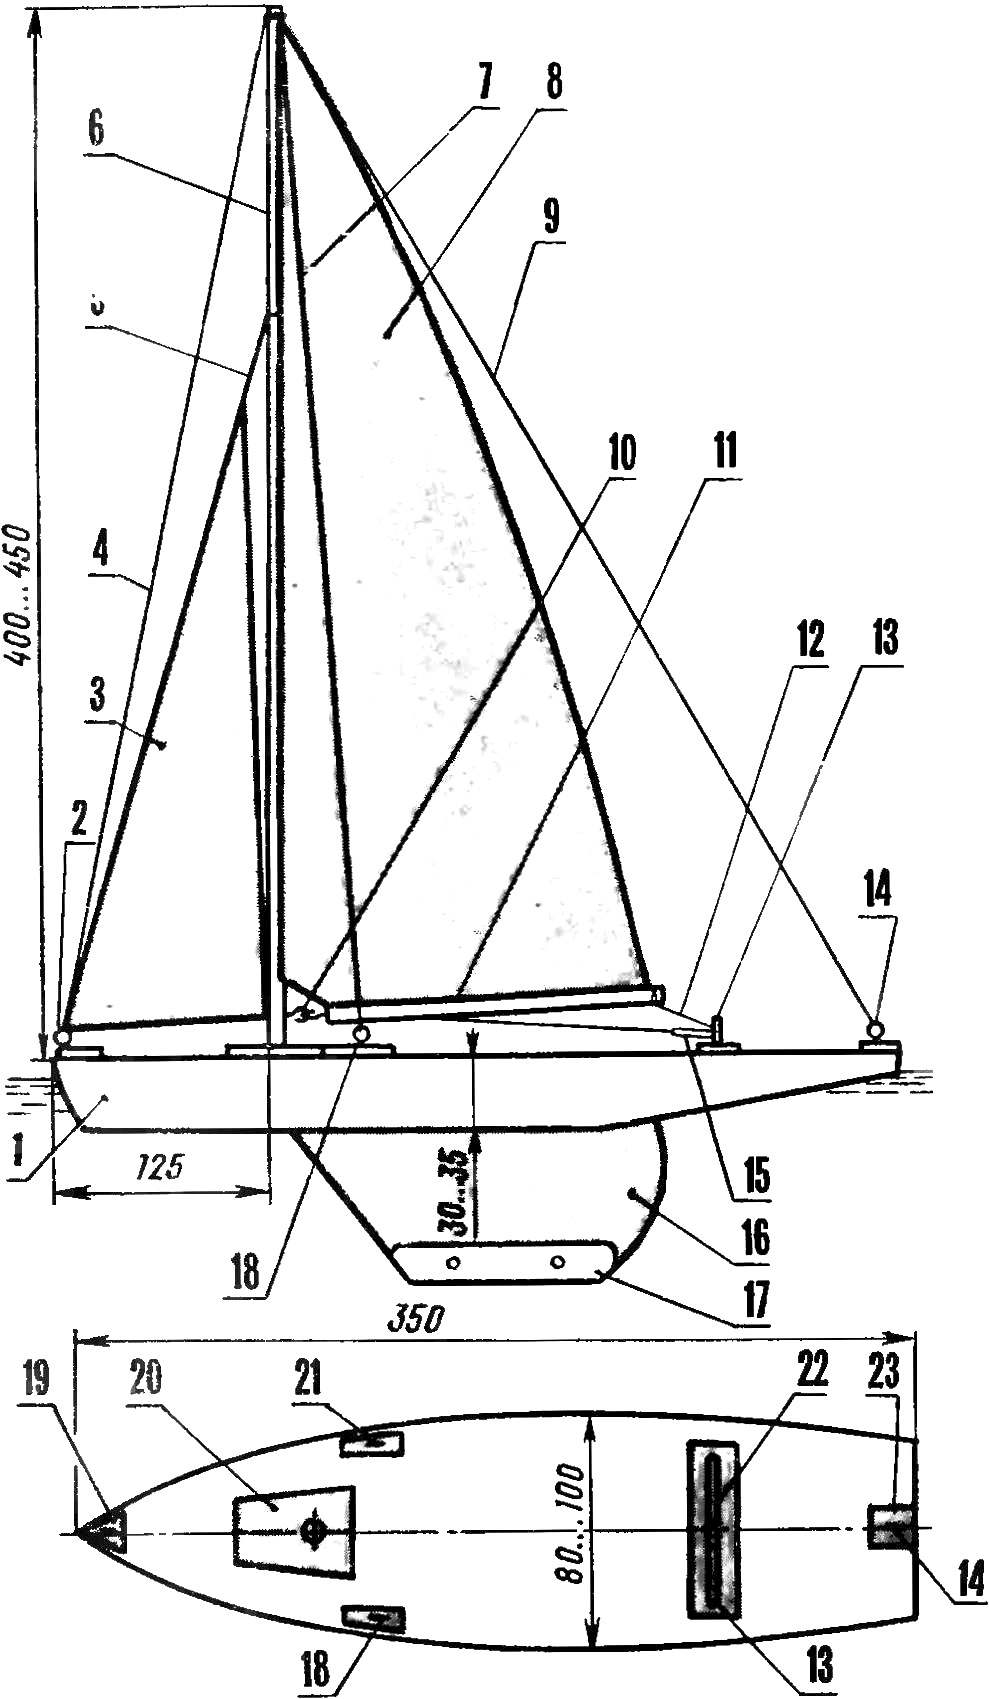 General view and main dimensions of the model.